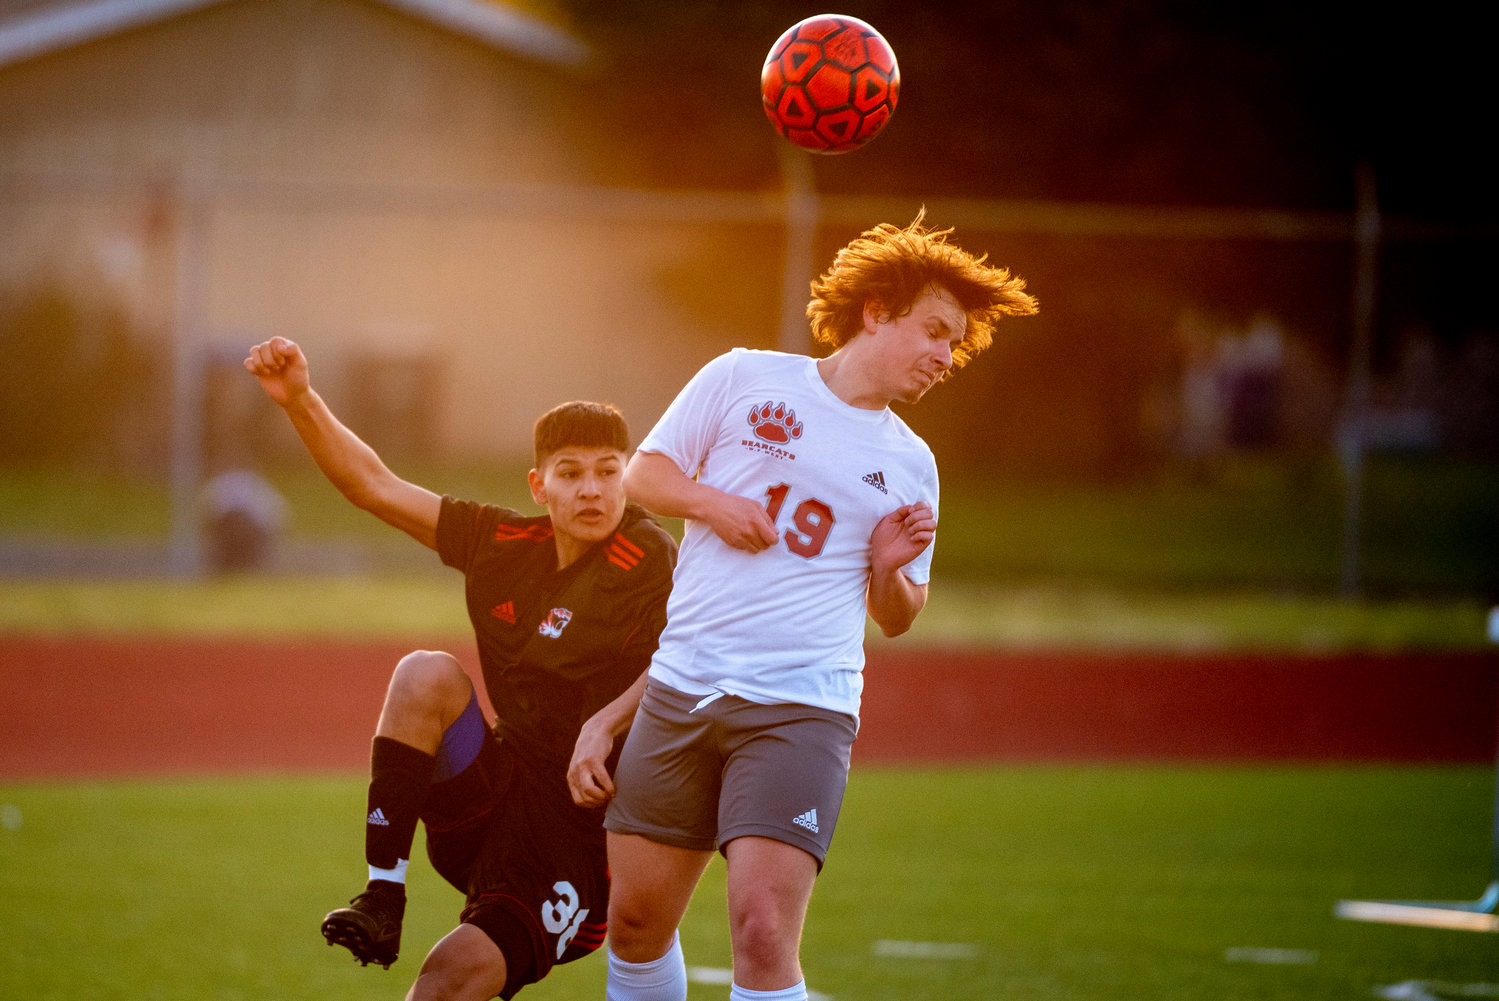 W.F. West's James Villanueva (19) goes for a header against Centralia's David Arevall-Correa (38) during a game in Centralia on April 22.